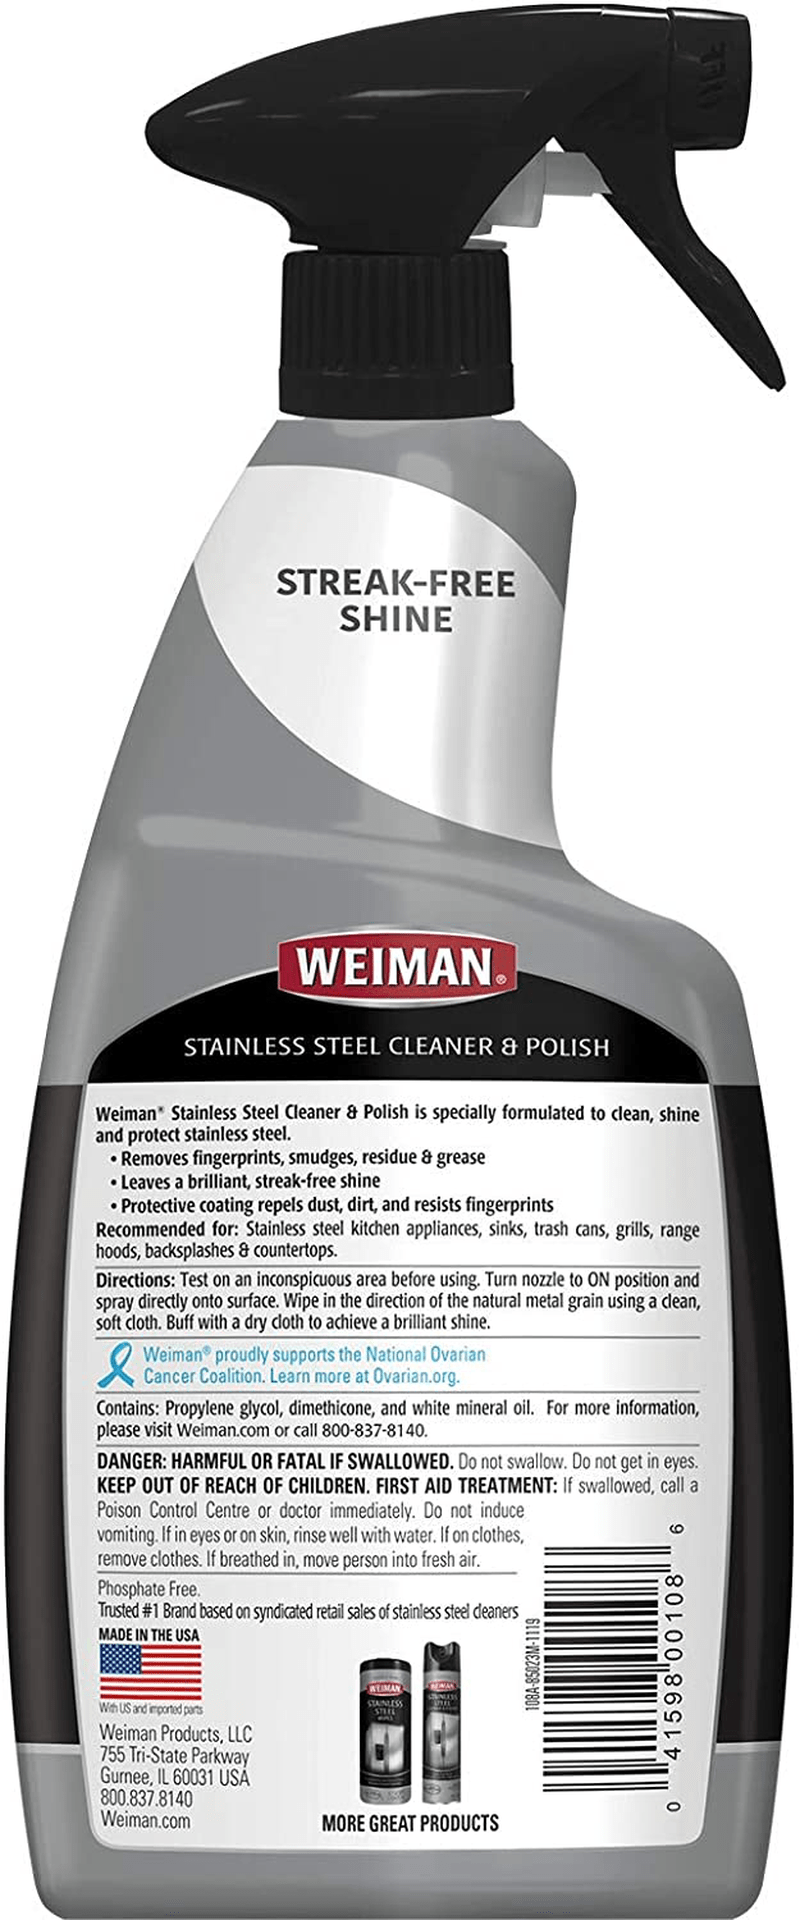 Weiman Stainless Steel Cleaner and Polish - 22 Ounces (Microfiber Cloth) - Appliance Surfaces Leave Behind a Brilliant Shine